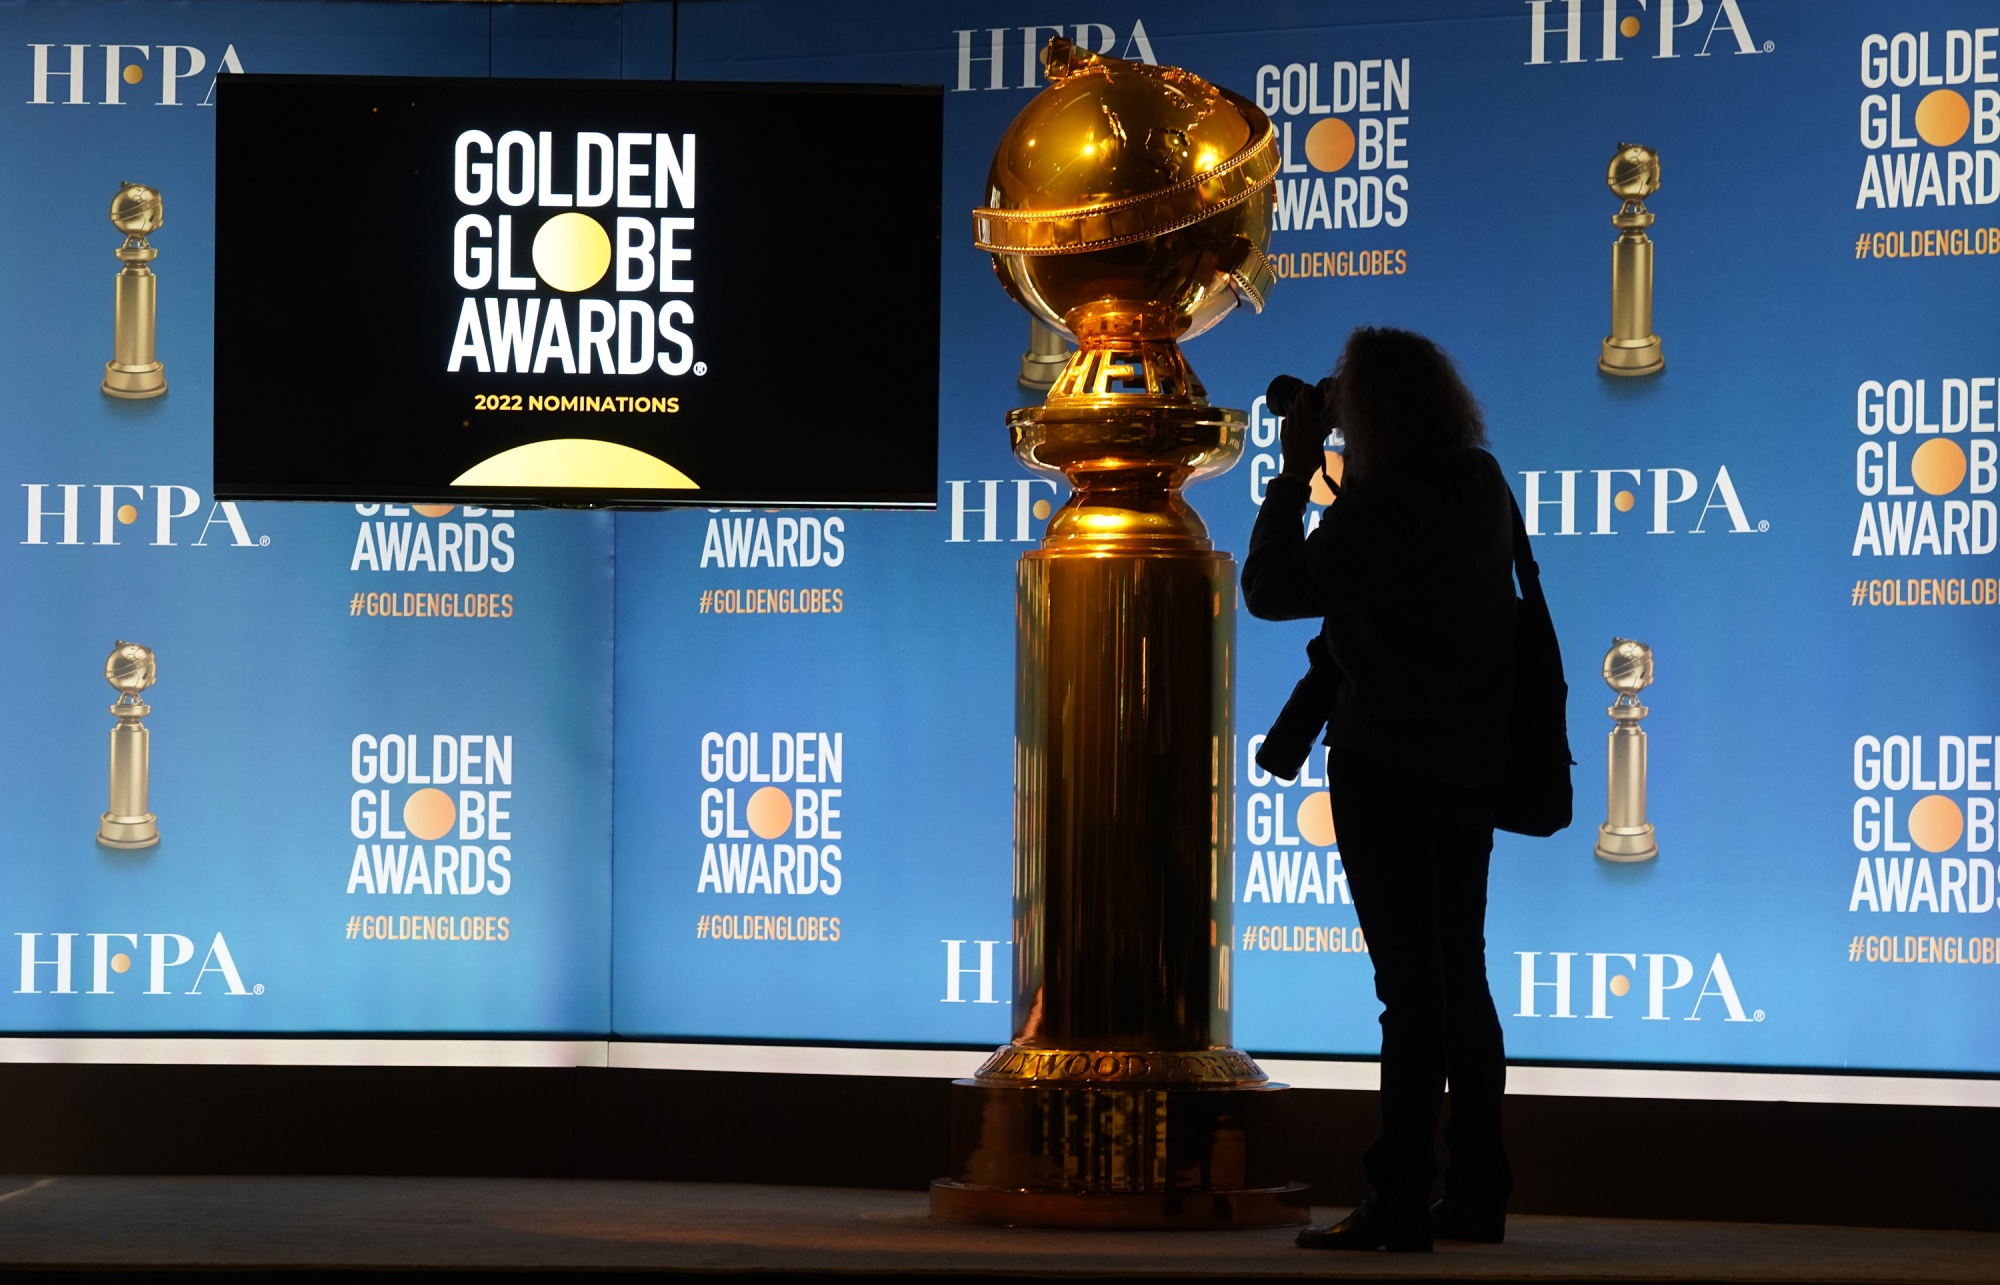 Partial List of Nominees for the Golden Globe Awards - Bloomberg